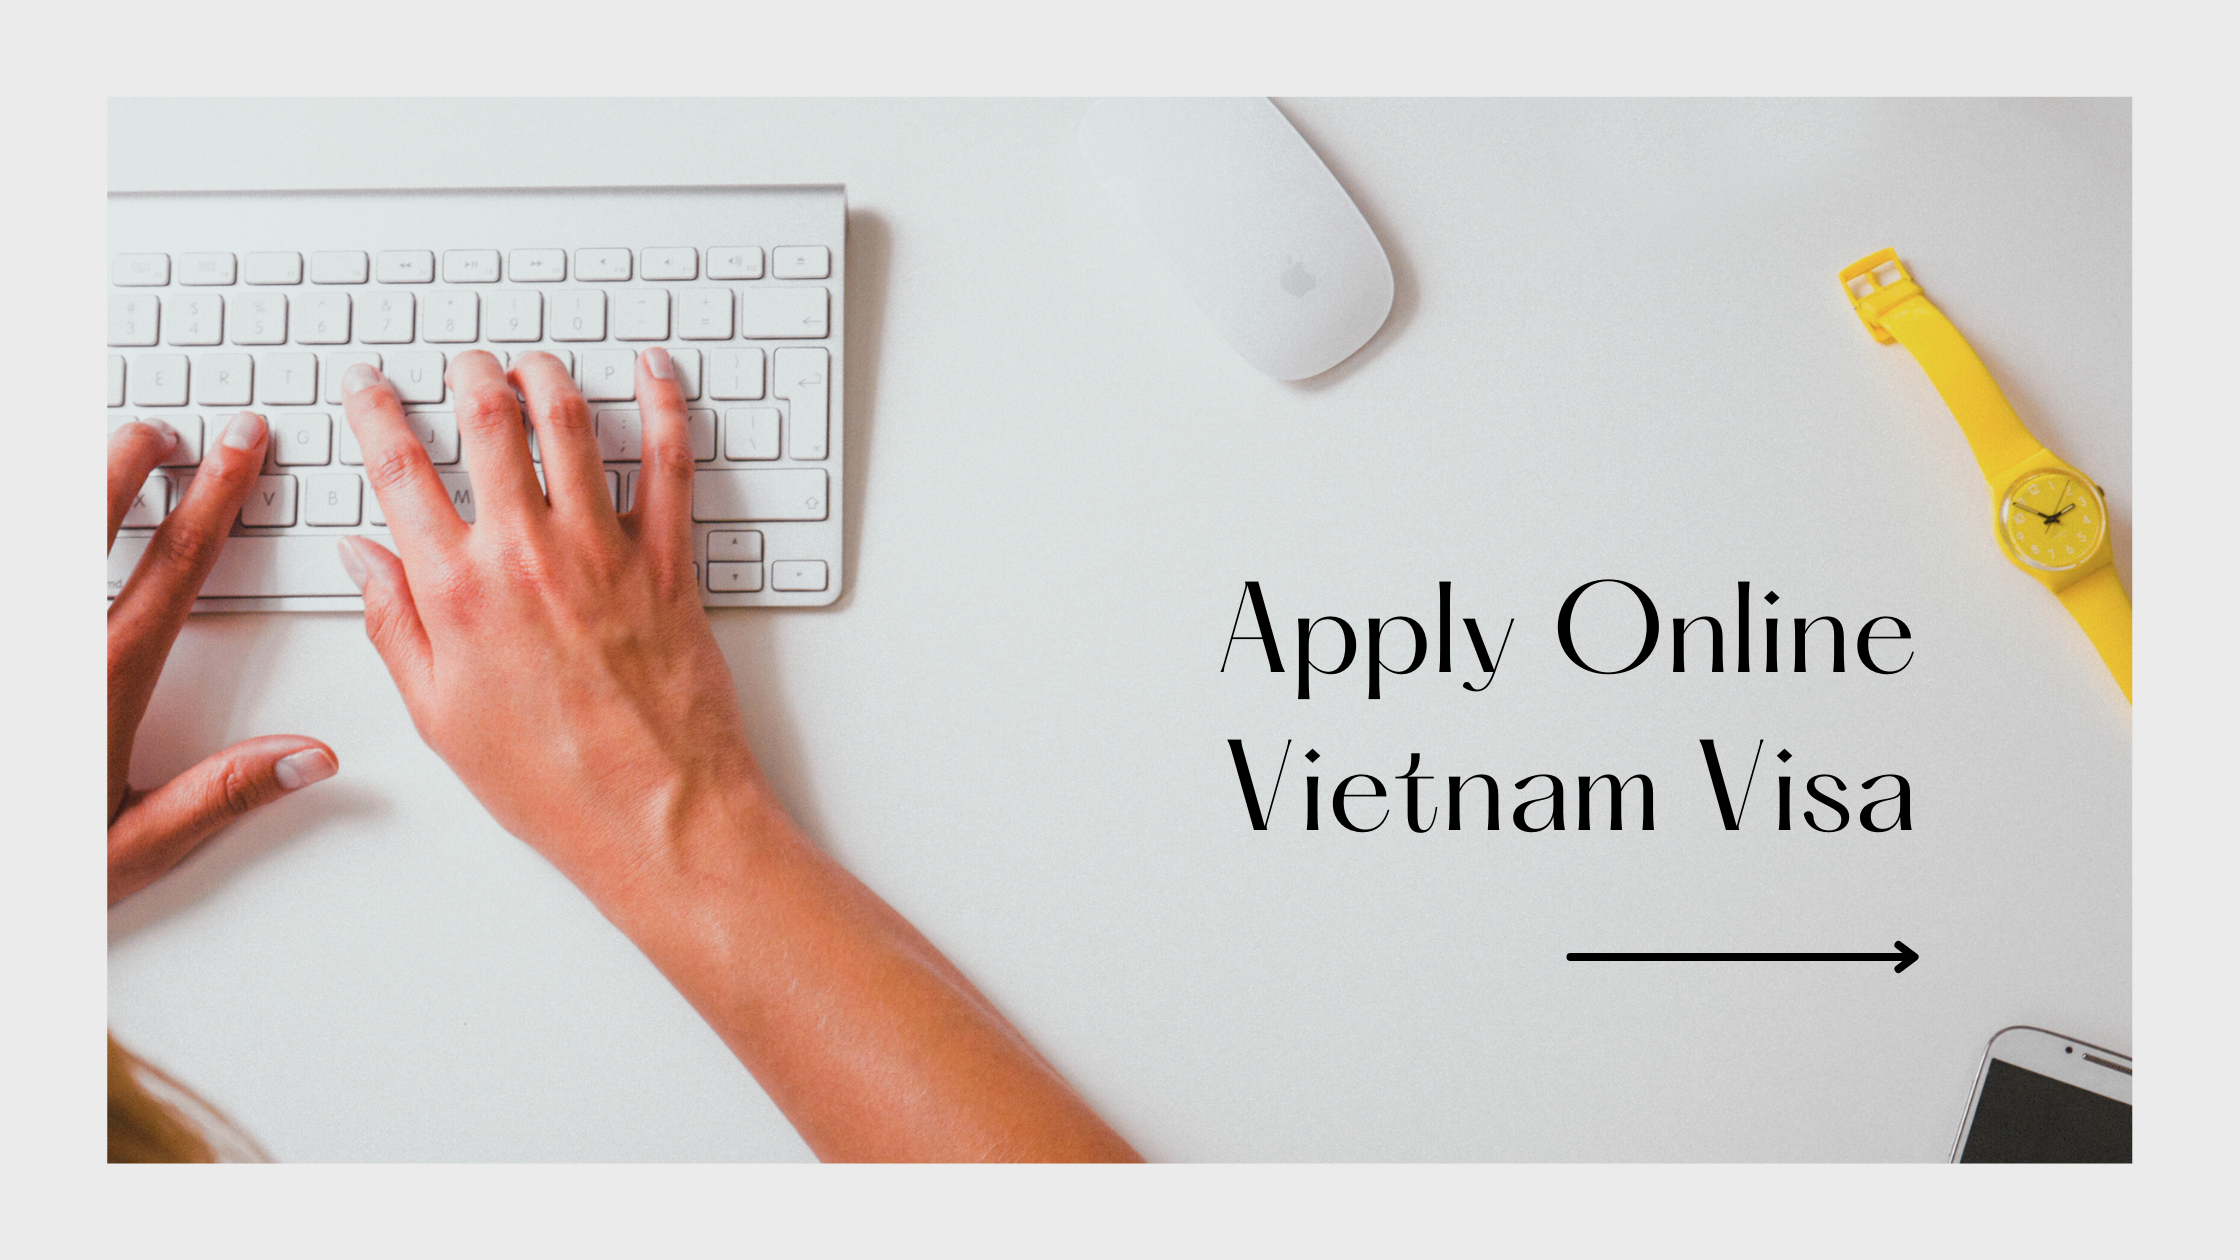 Score a Winning Goal: Getting Your Vietnam Visa for Football Trials and Tournaments